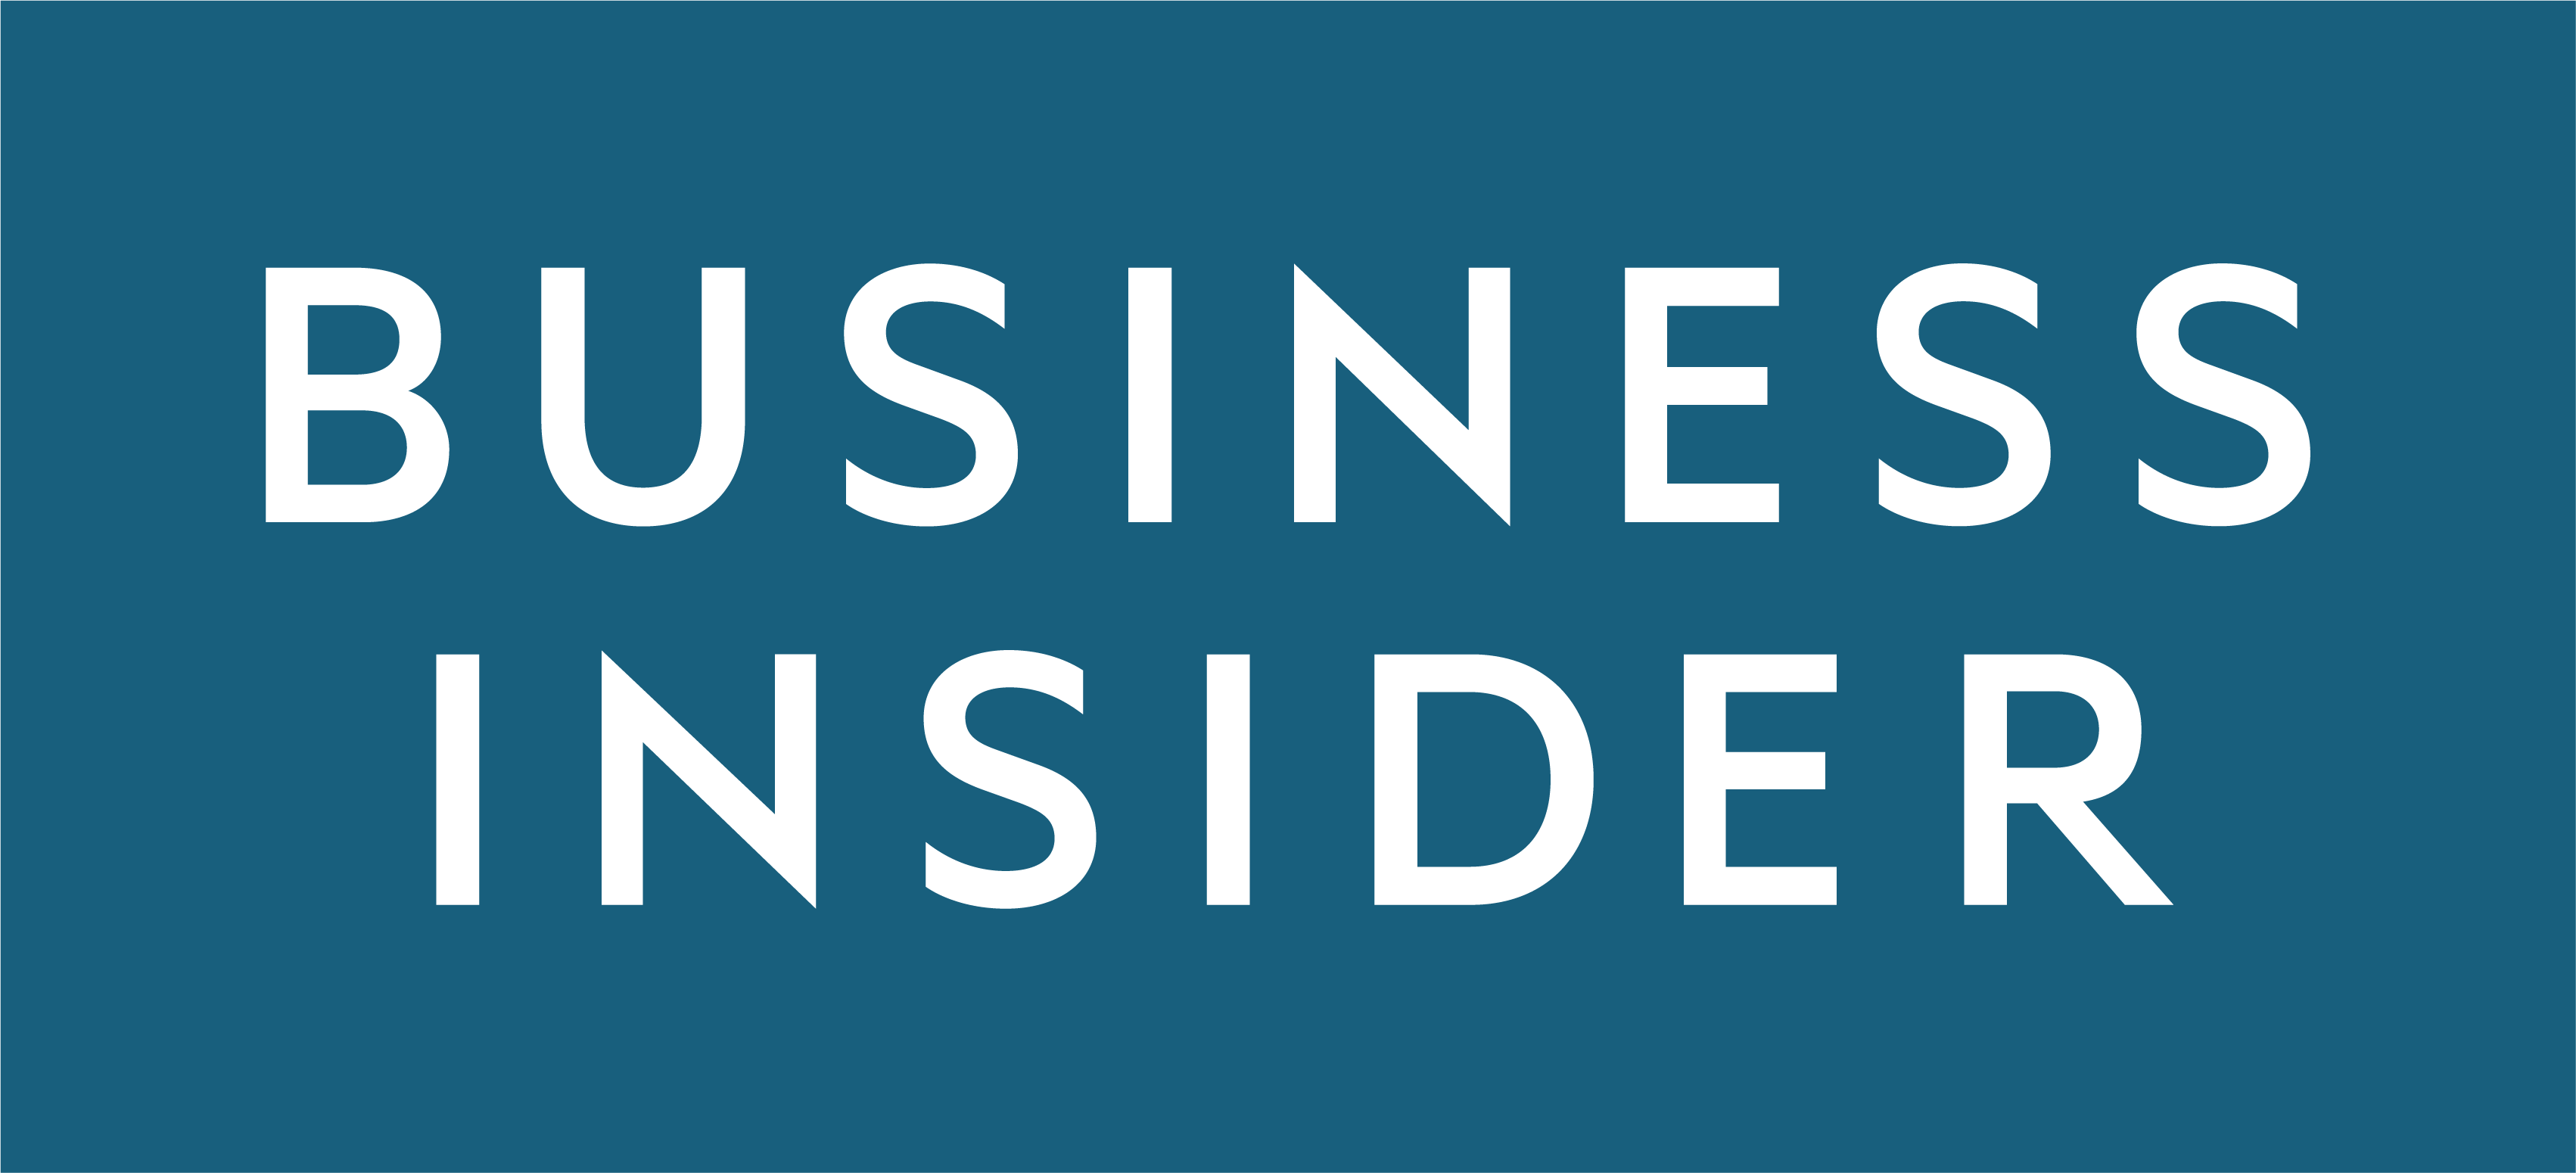 The Business Insider logo is shown in white text against a light blue background.